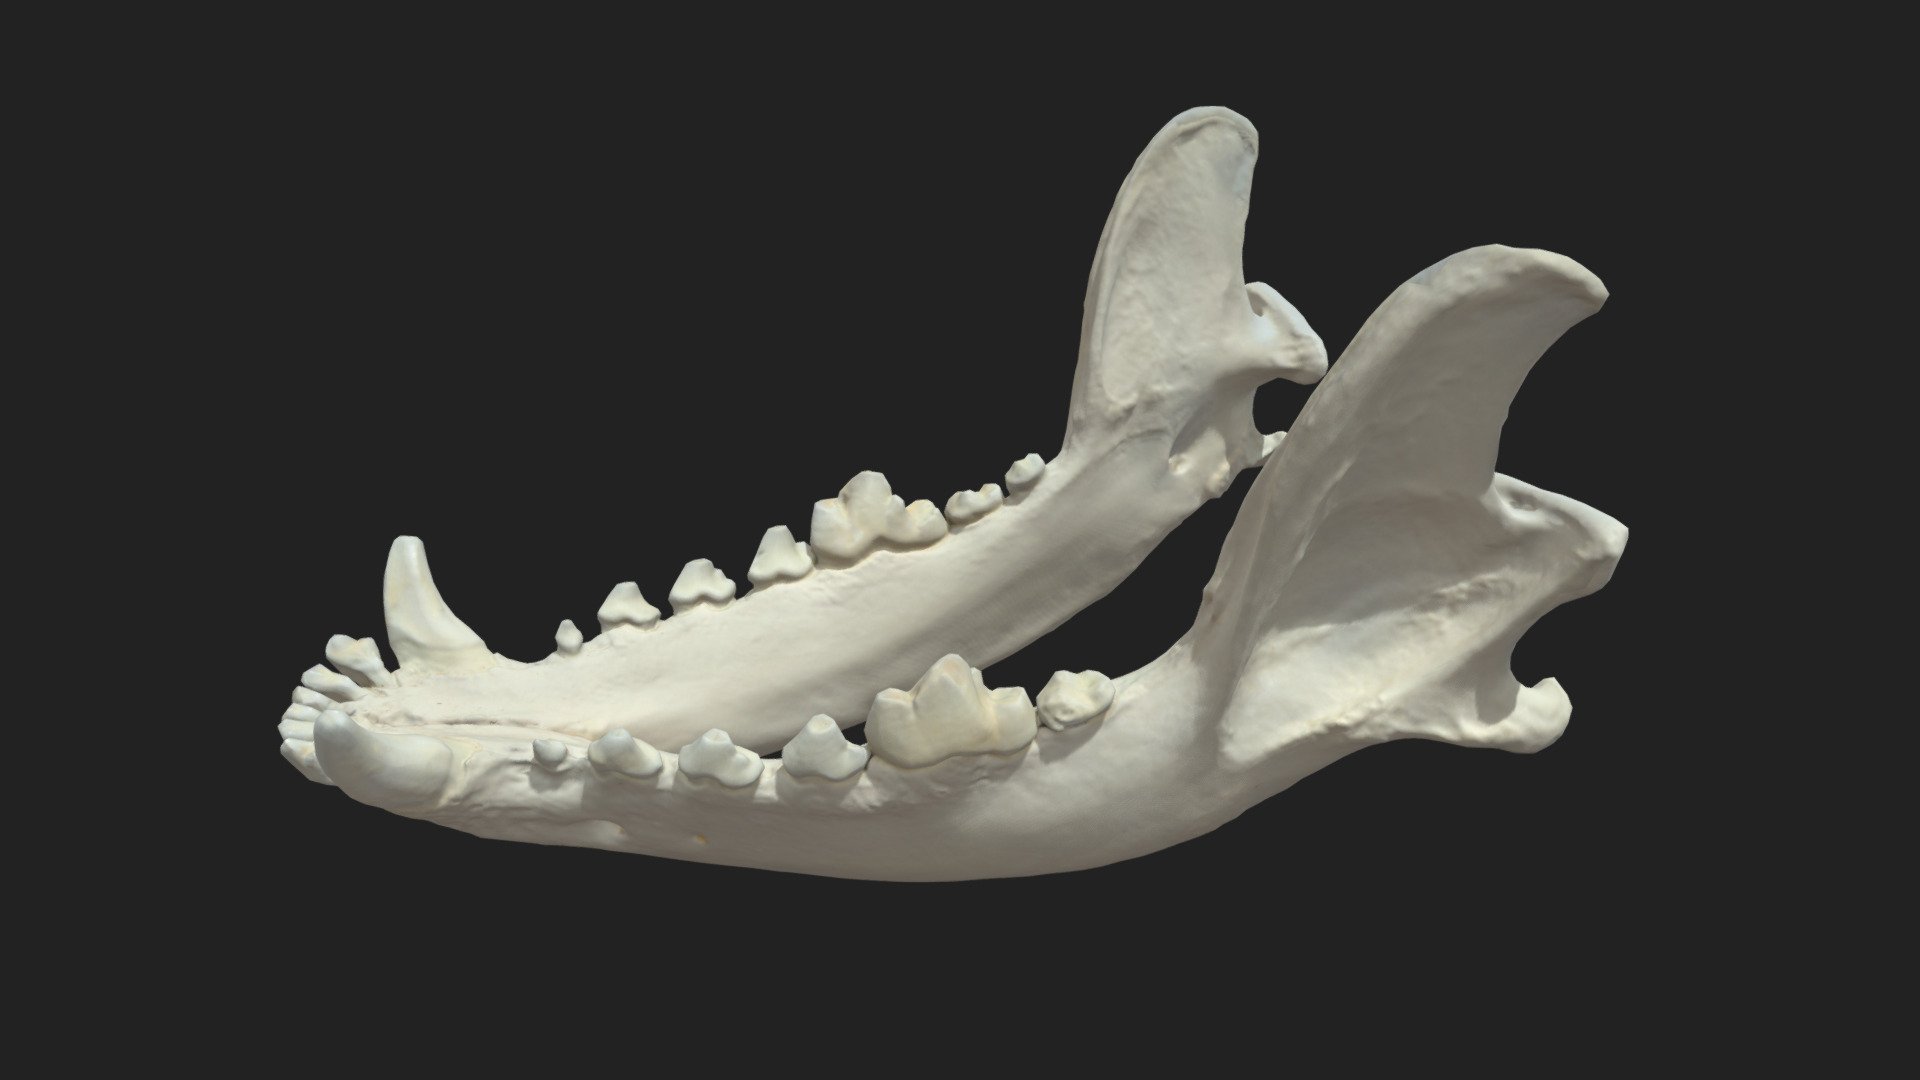 mandible (mandibula) of a dog

size of the specimen: 154 x 76 x 94 mm

3D scanning performed with the structured light scanner “Artec Space Spider” - lower jaw (mandibula) dog - 3D model by vetanatMunich 3d model